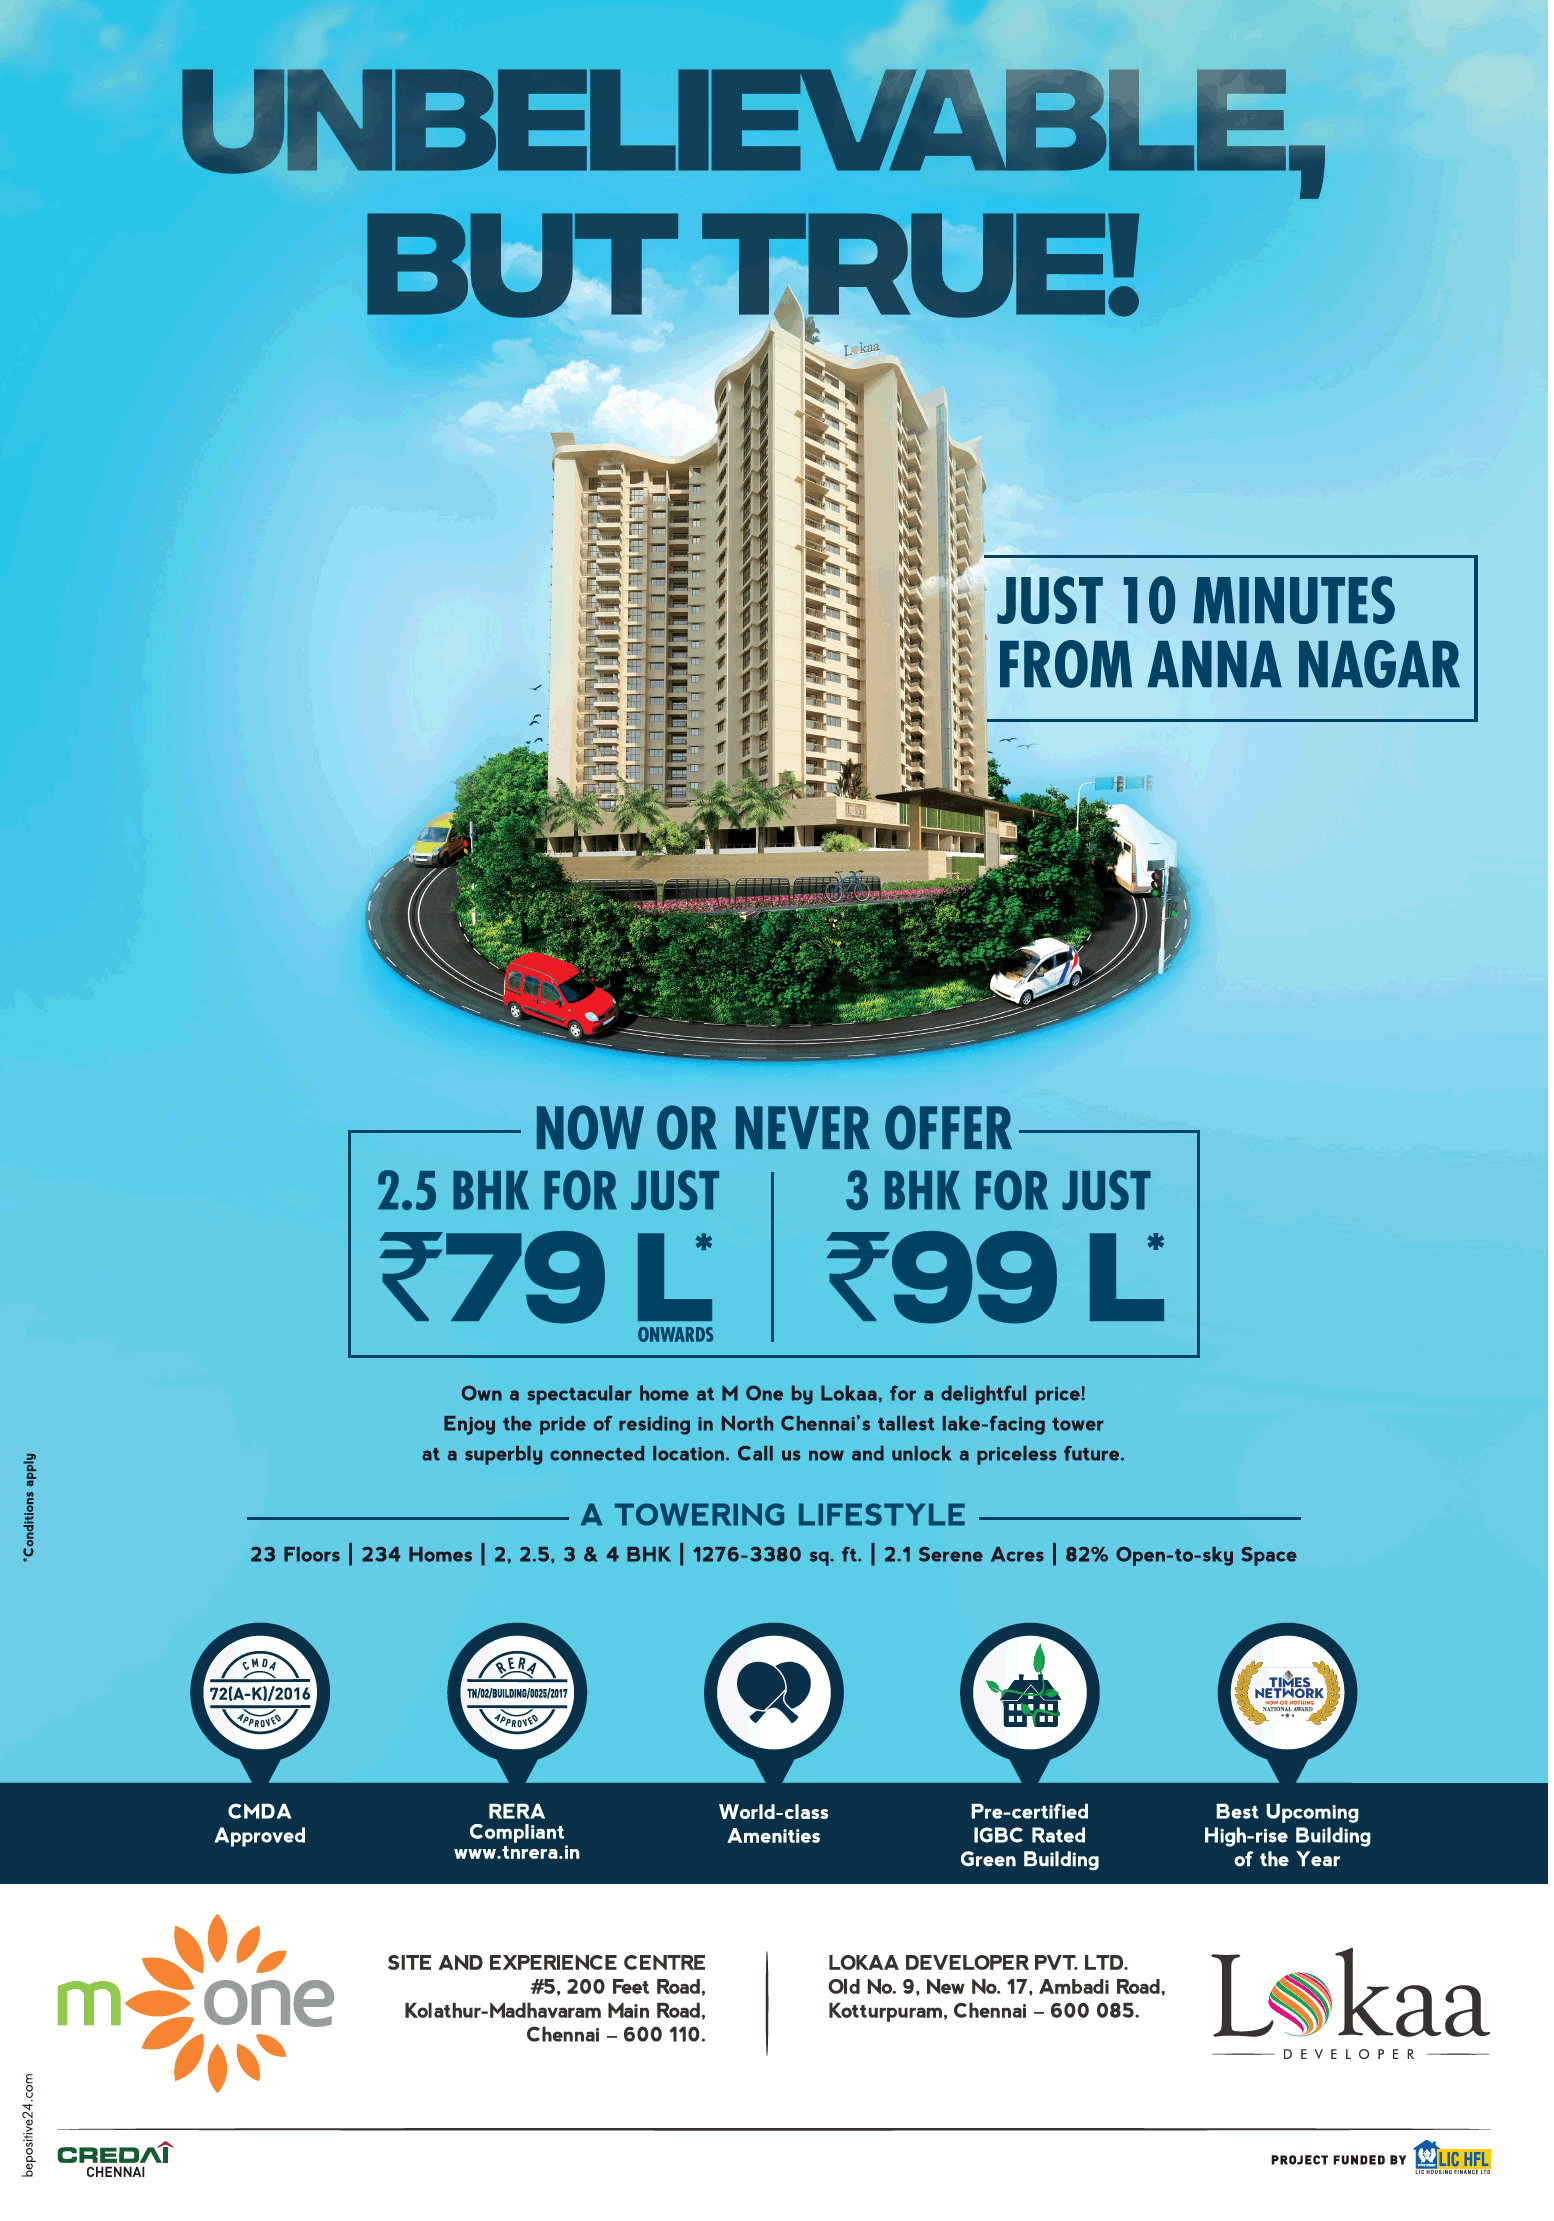 Now or never offer 2.5 BHK for just Rs 79 Lakh at Lokaa M One, Chennai